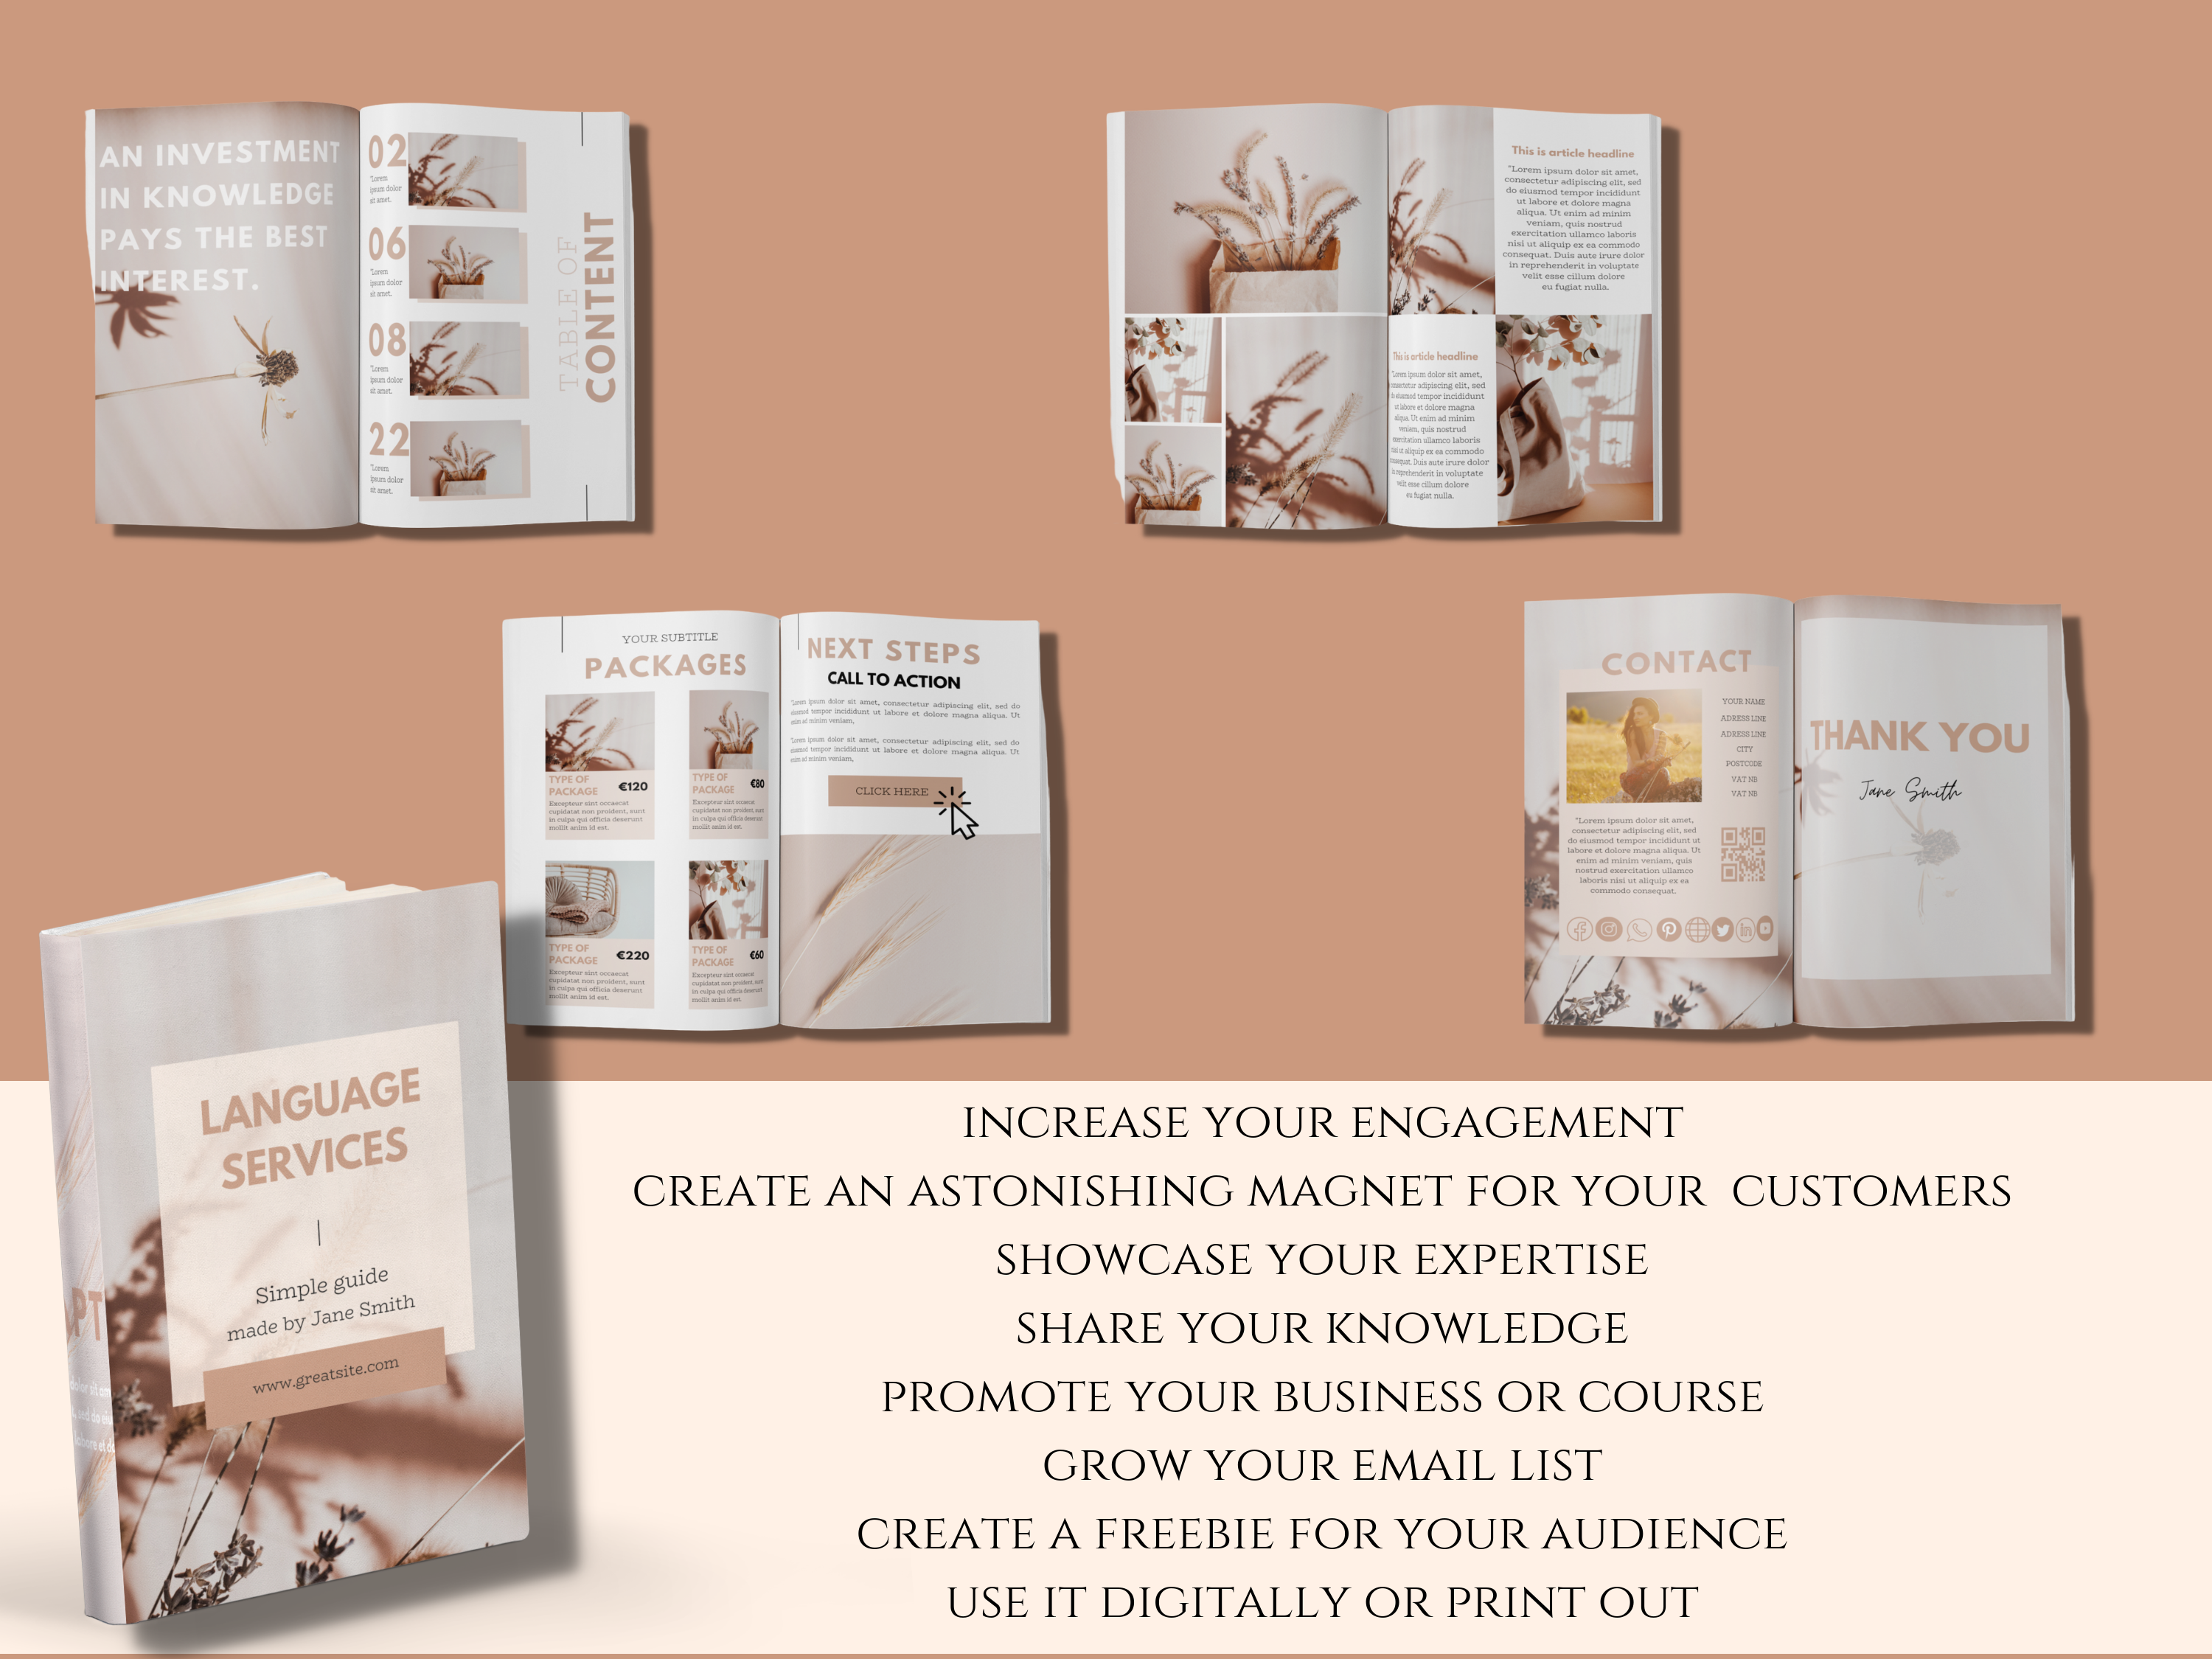 Aesthetic Ebook Templates for Female Entrepreneurs and coaches